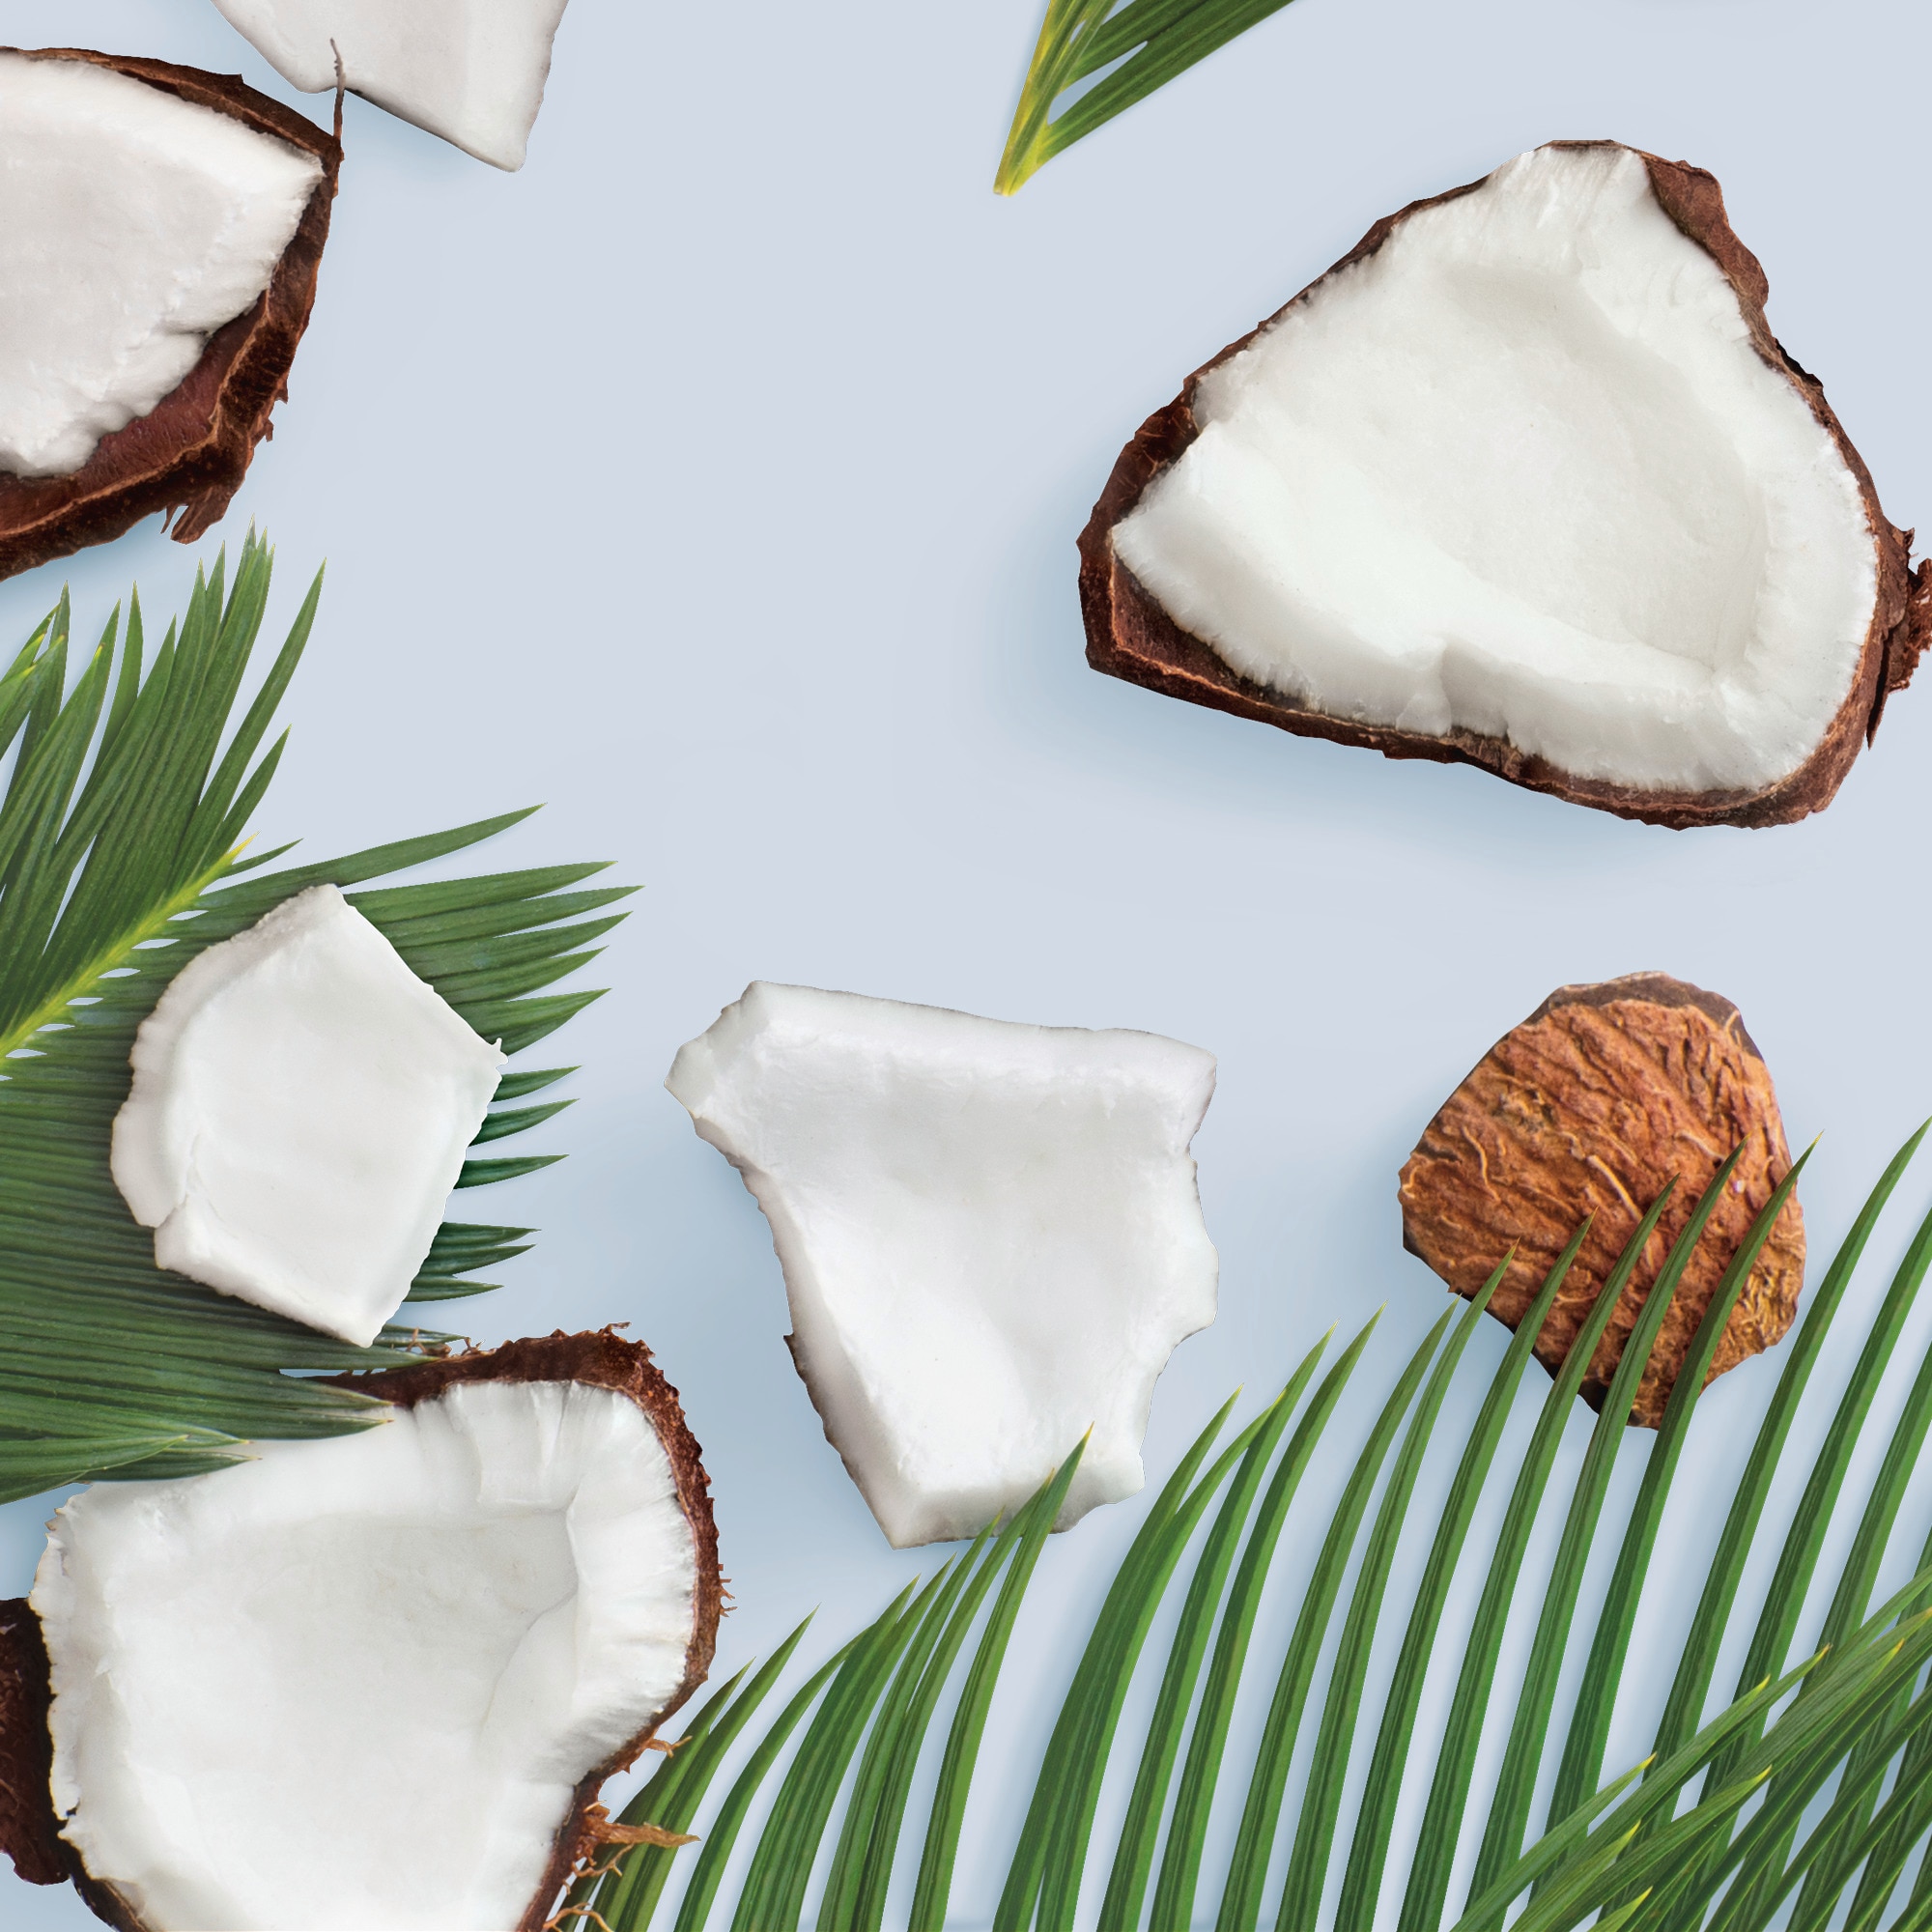 Coconut pieces and leaves